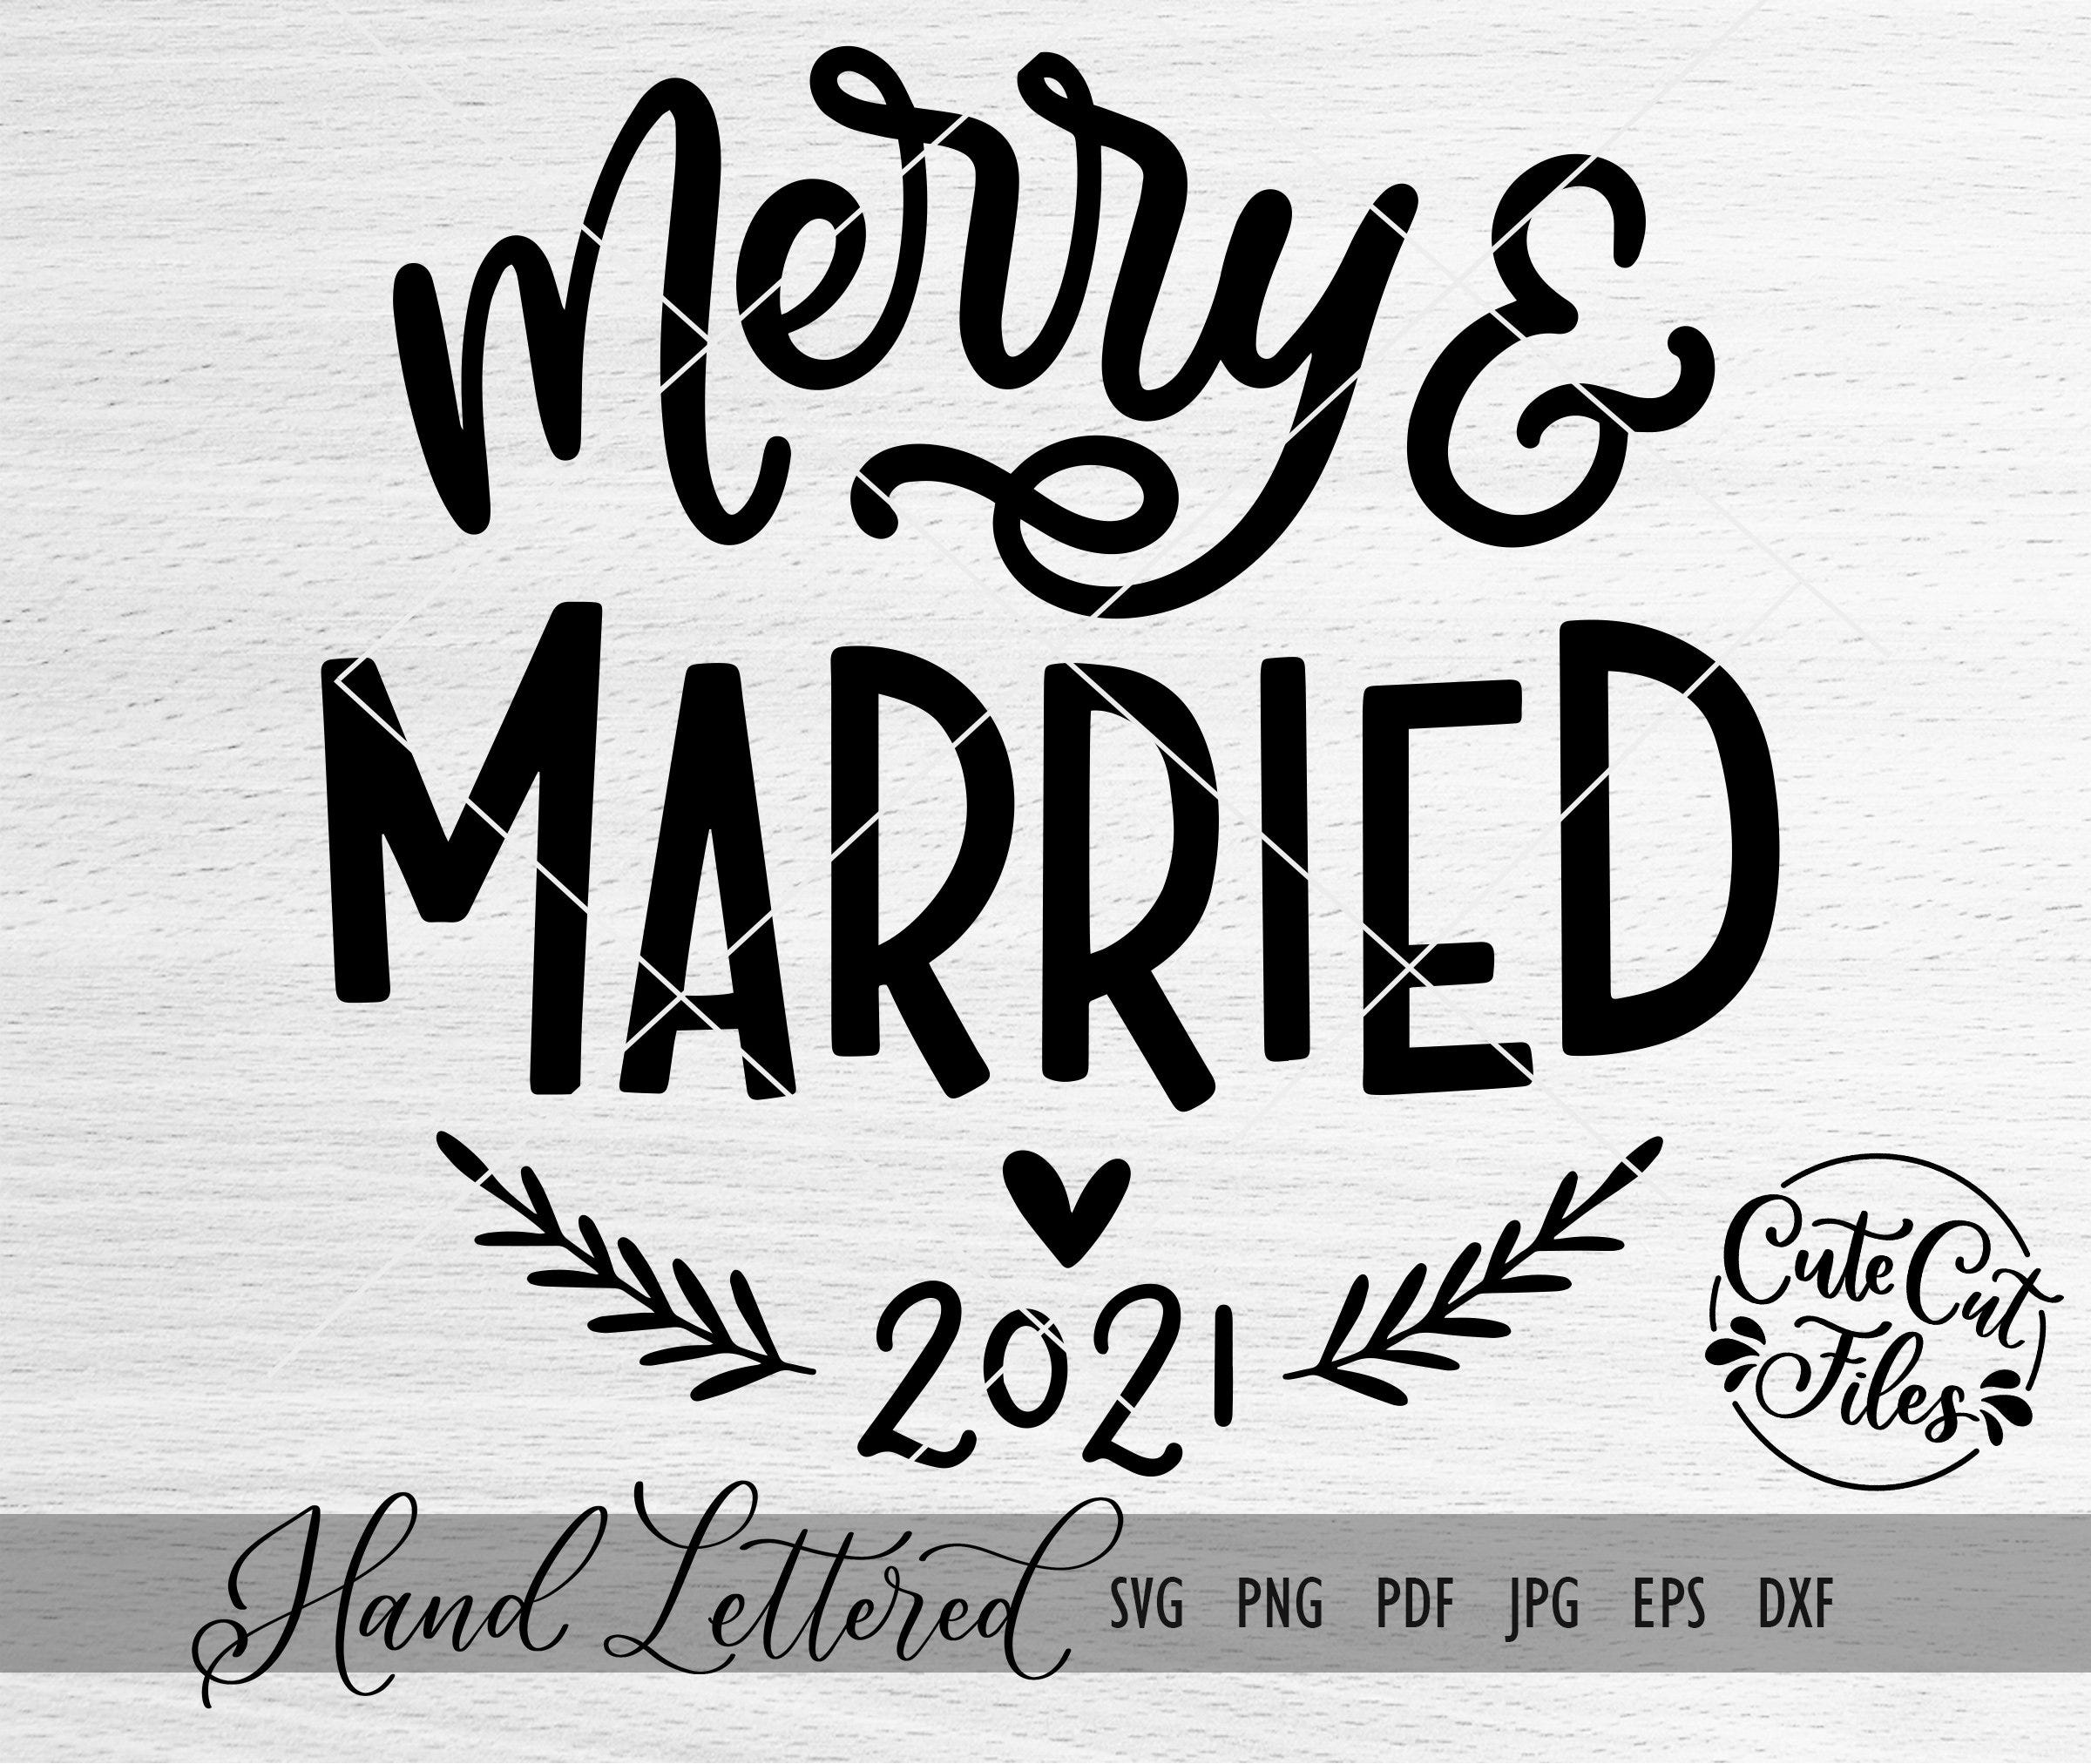 Merry and Married SVG PNG DXF | Just Married Ornament 2021 svg | Newlywed Ornament svg | Our First Christmas Ornament 2021 svg